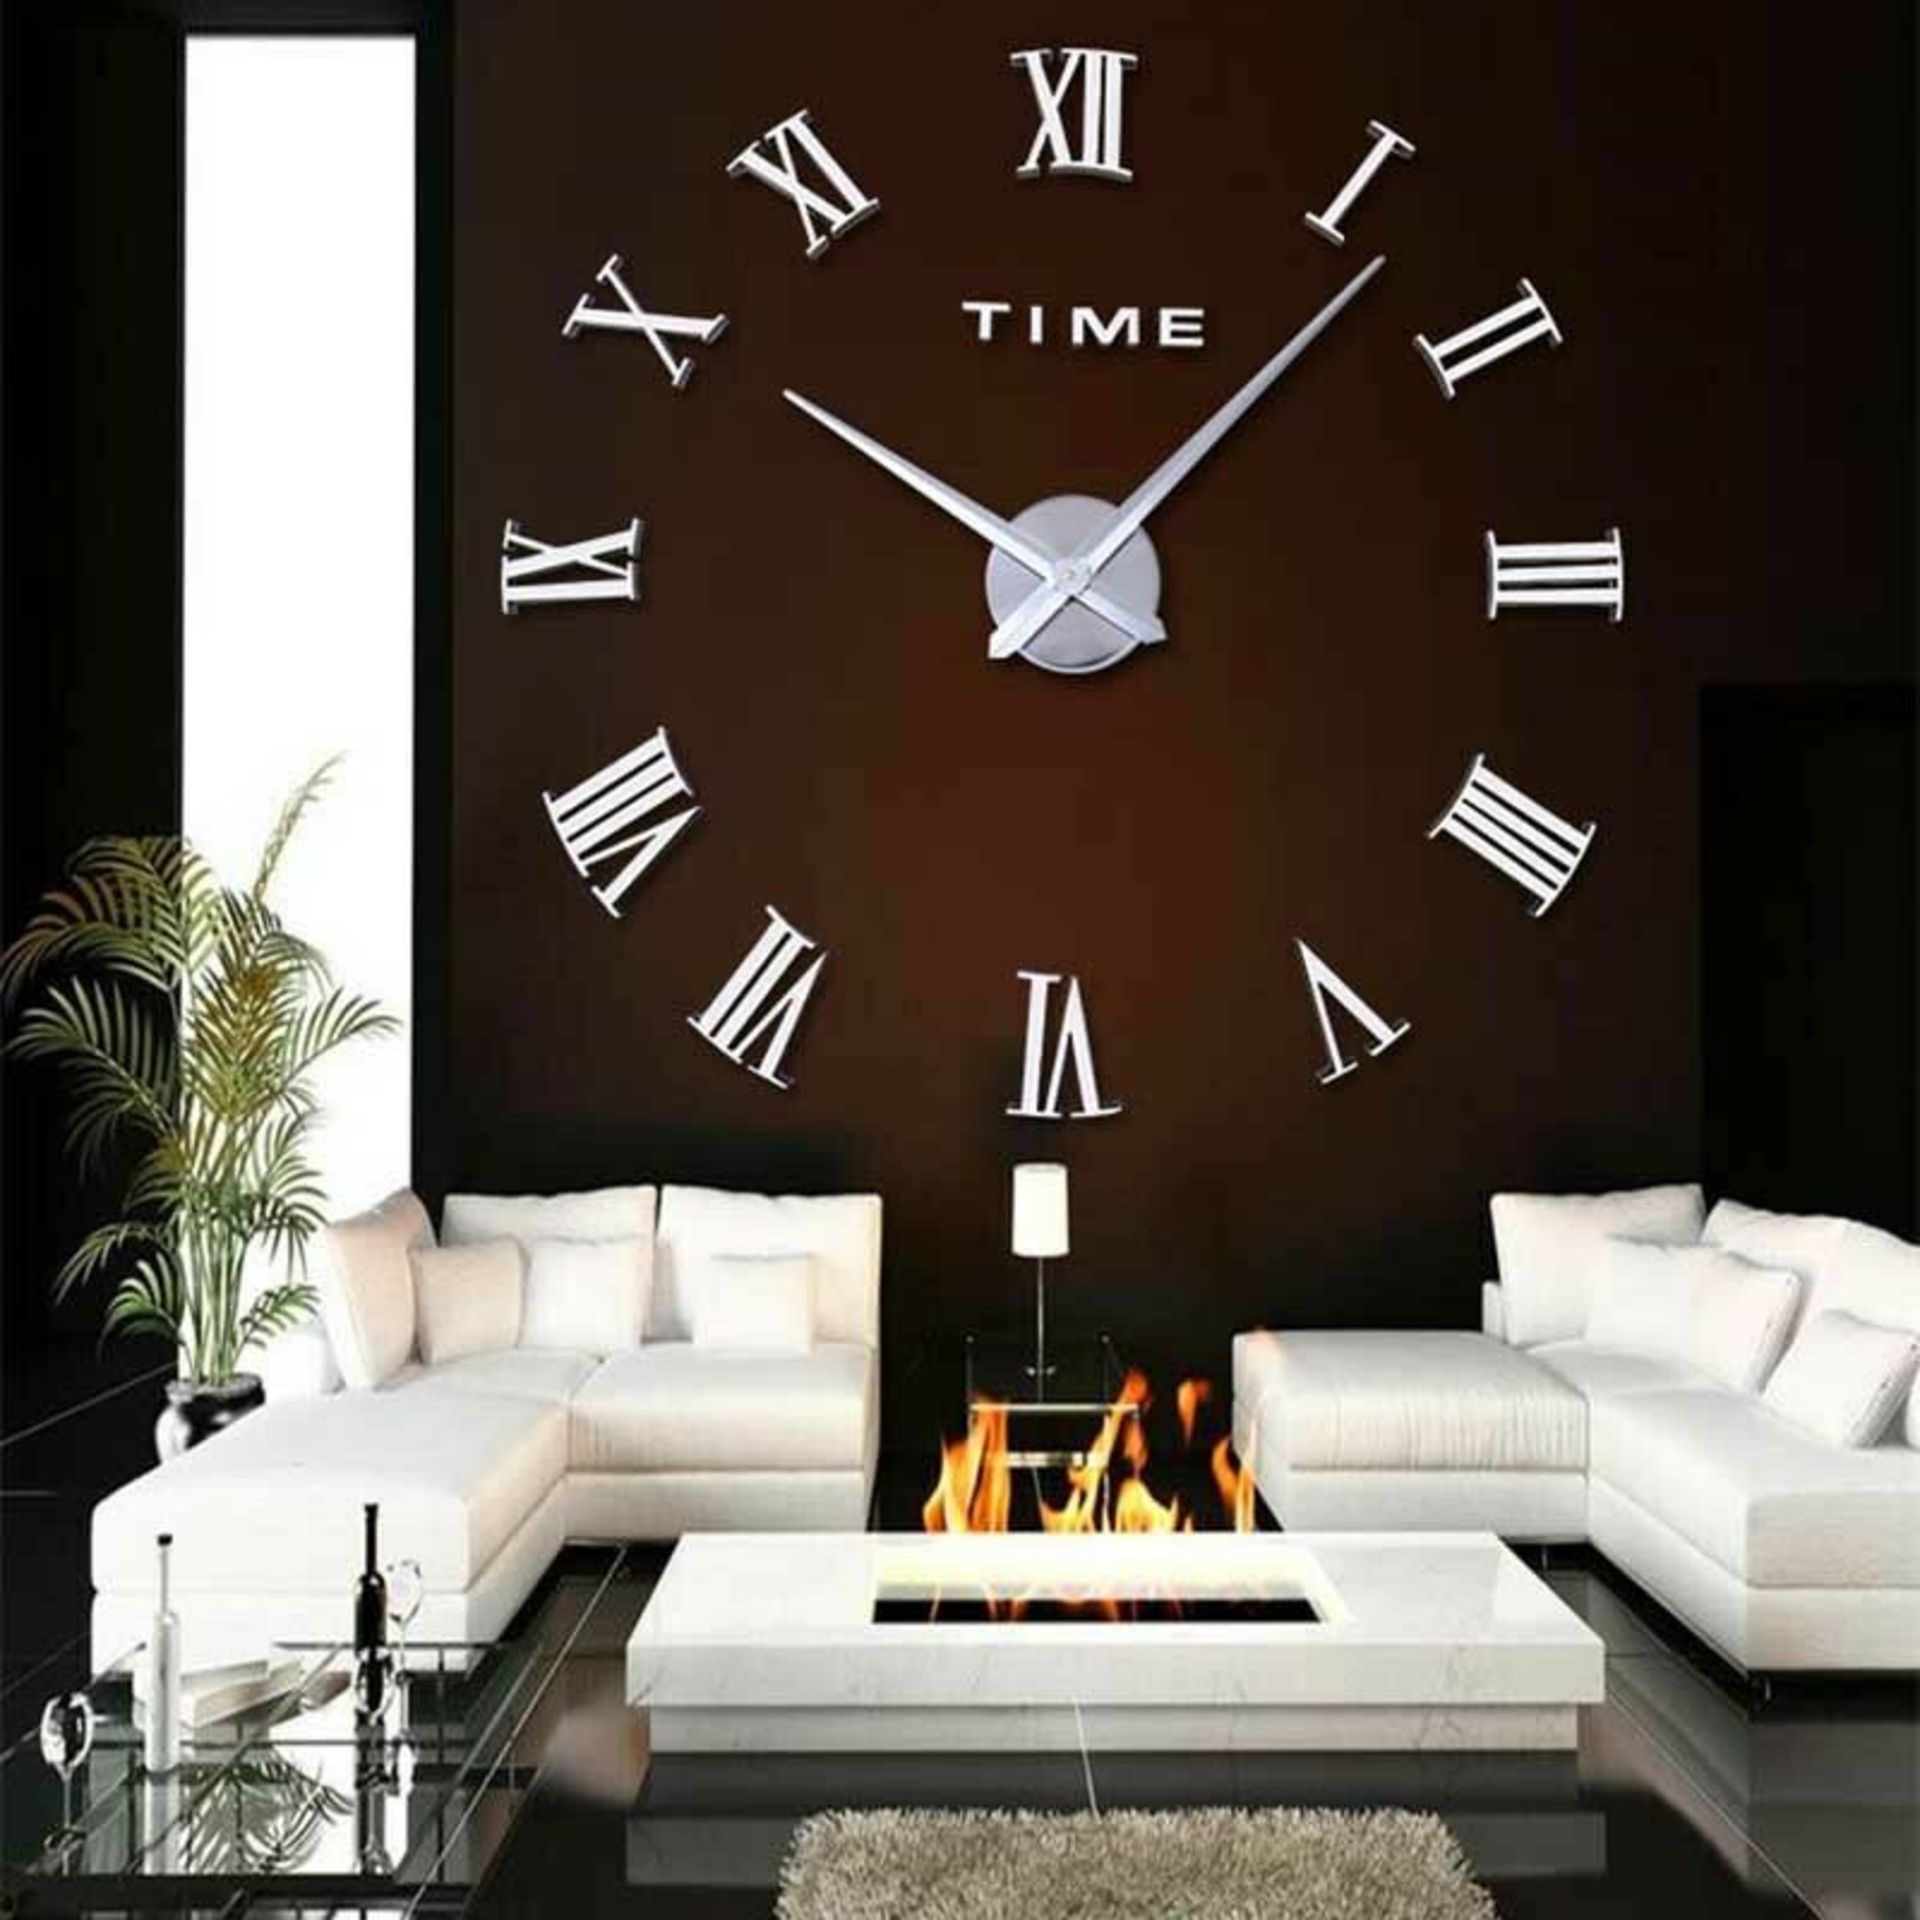 3D DIY EXTRA LARGE NUMERALS LUXURY MIRROR WALL CLOCK SILVER *PLUS VAT* - Image 2 of 5